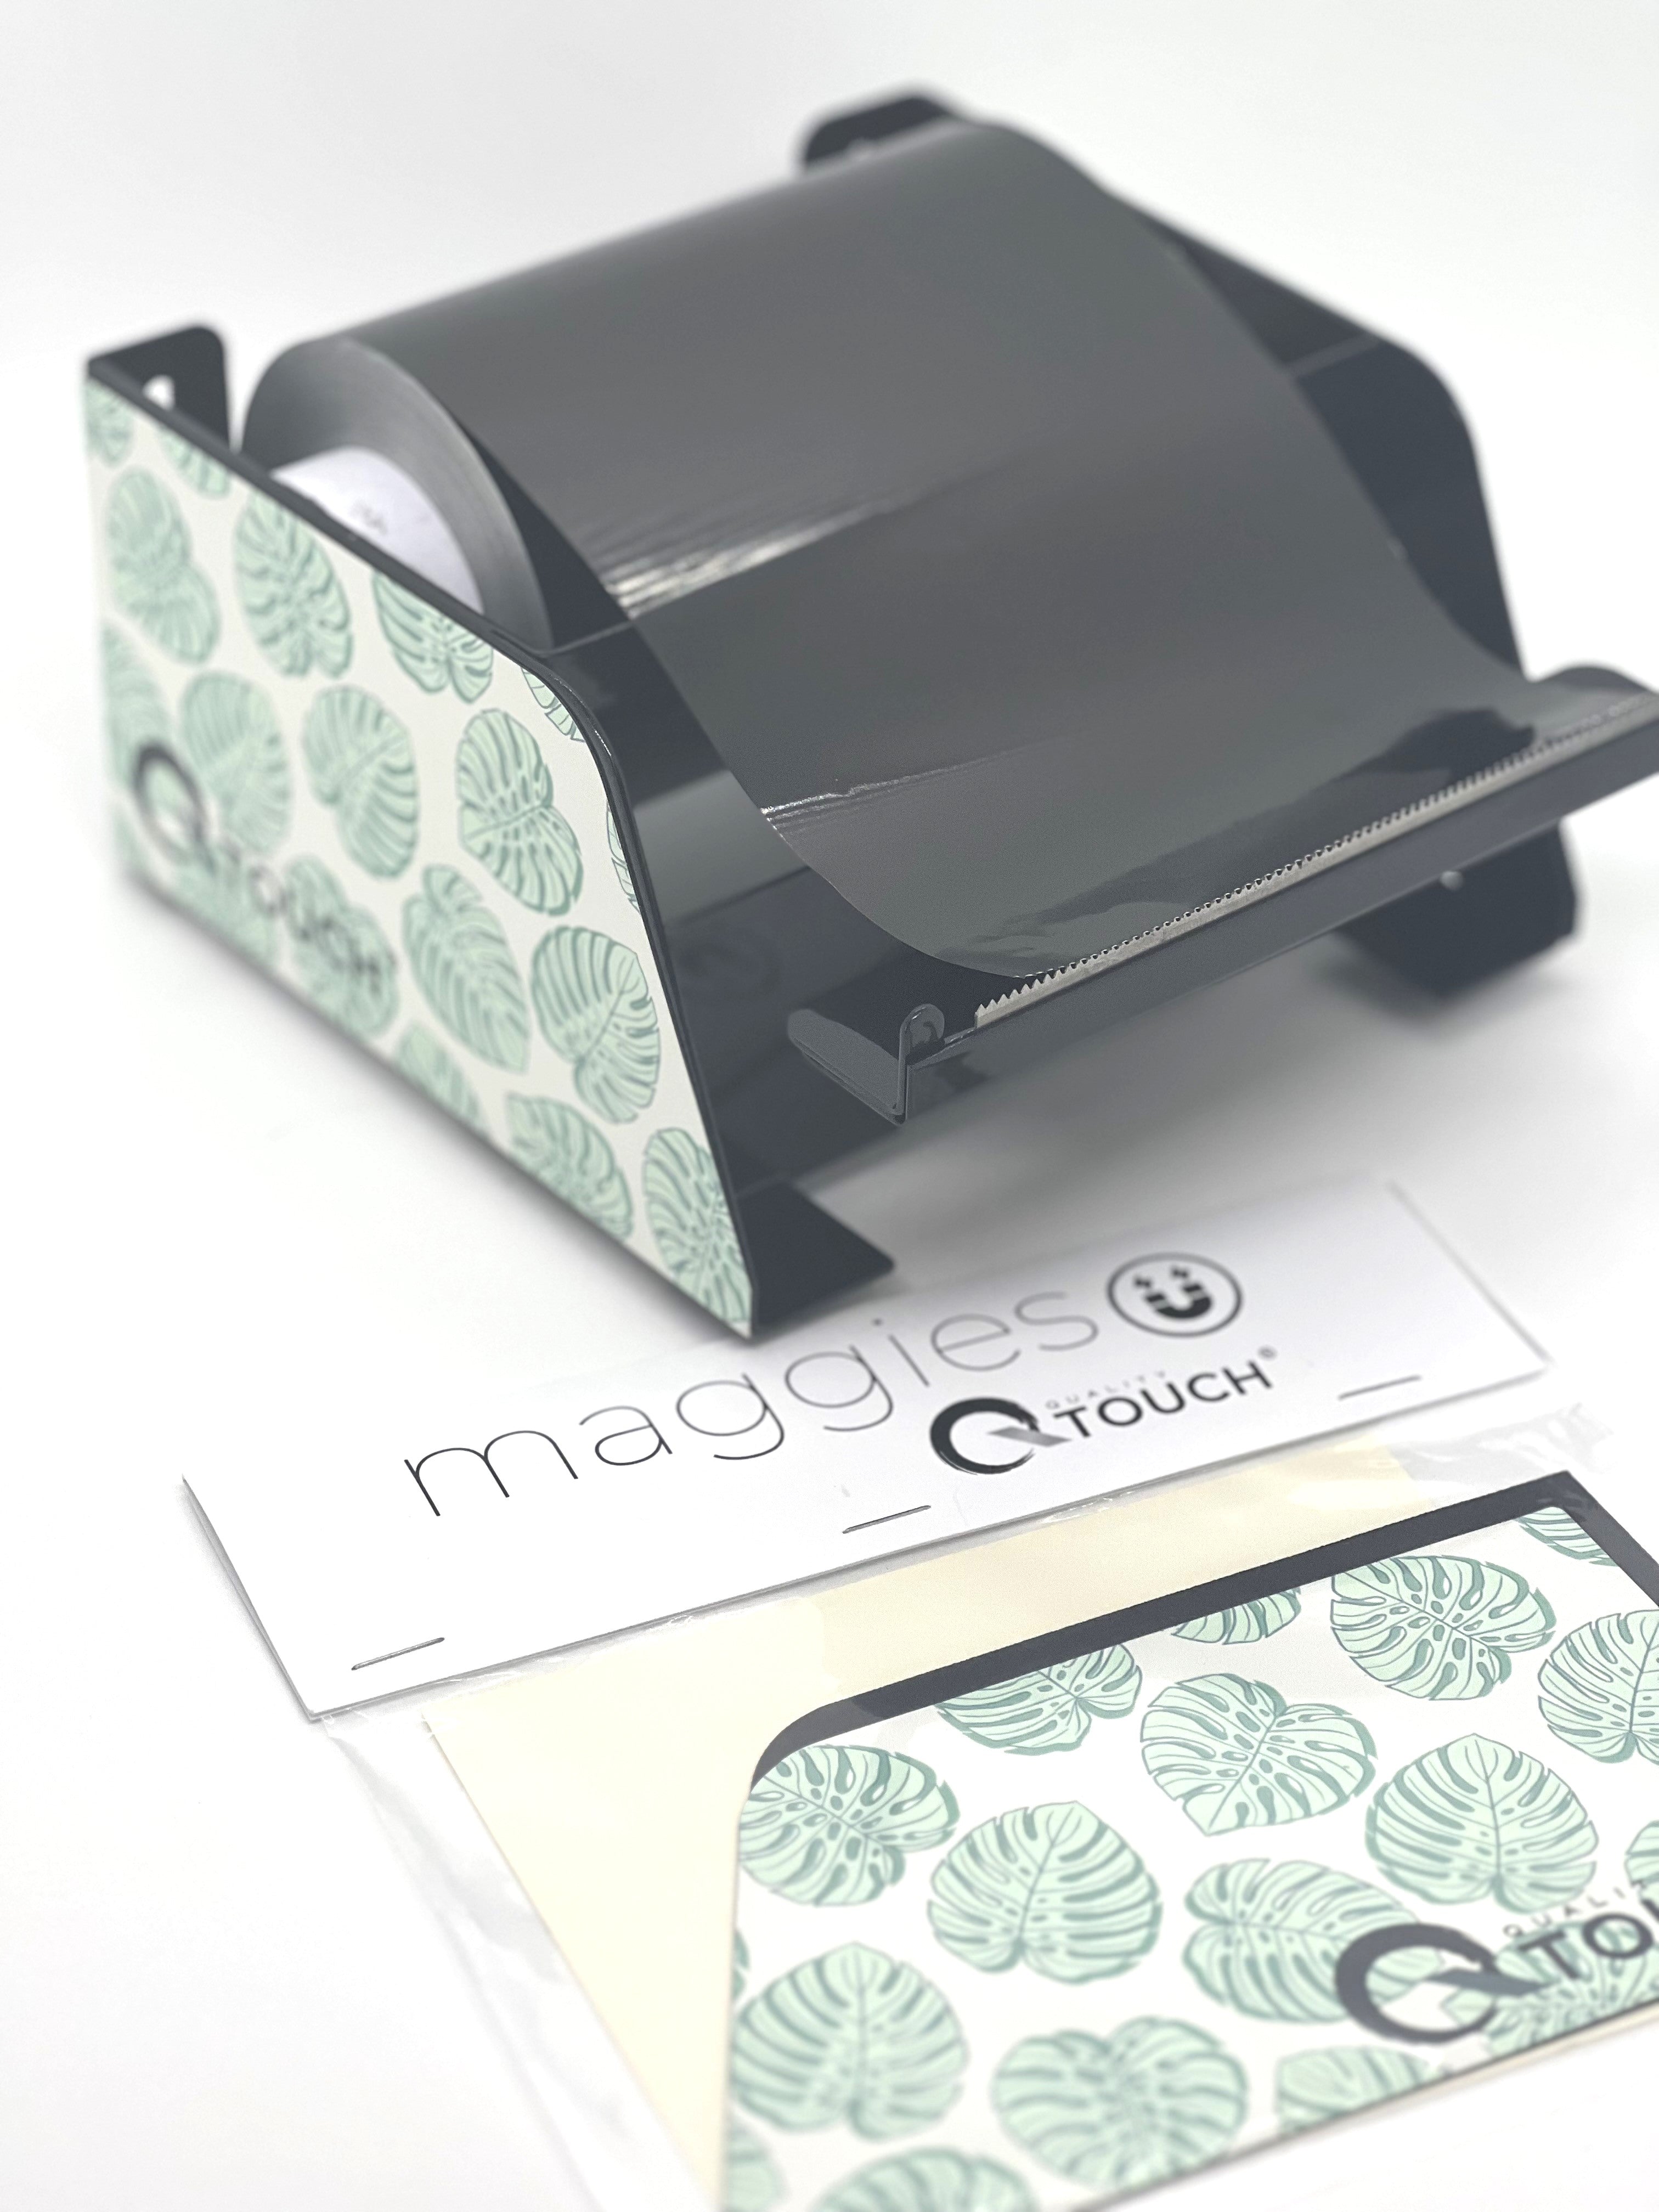 Quality Touch Foil Cutting Machine featuring the Monstera Mash Maggie